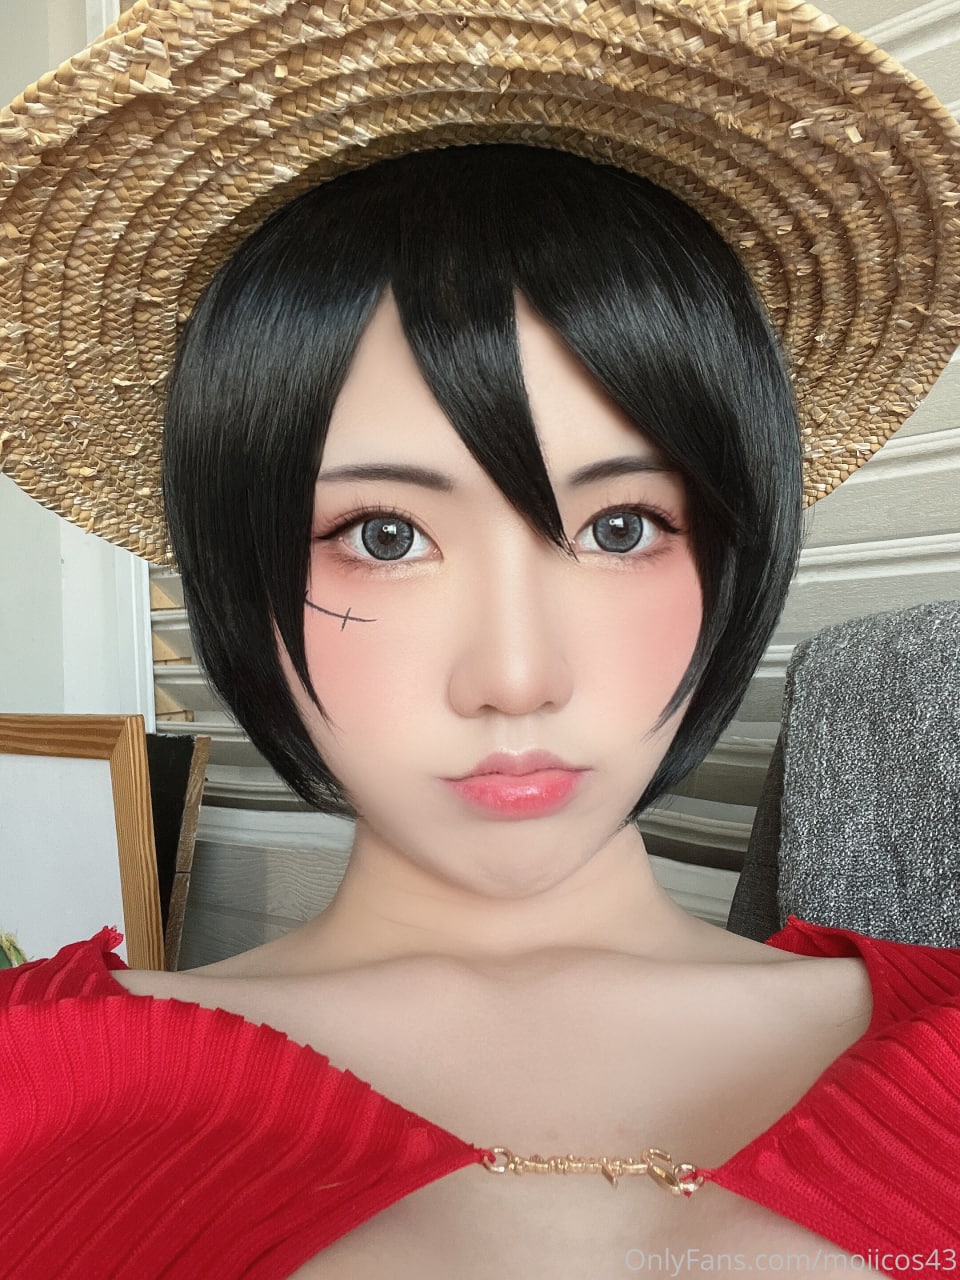 moiicos43 - Luffy - COSPLAY -